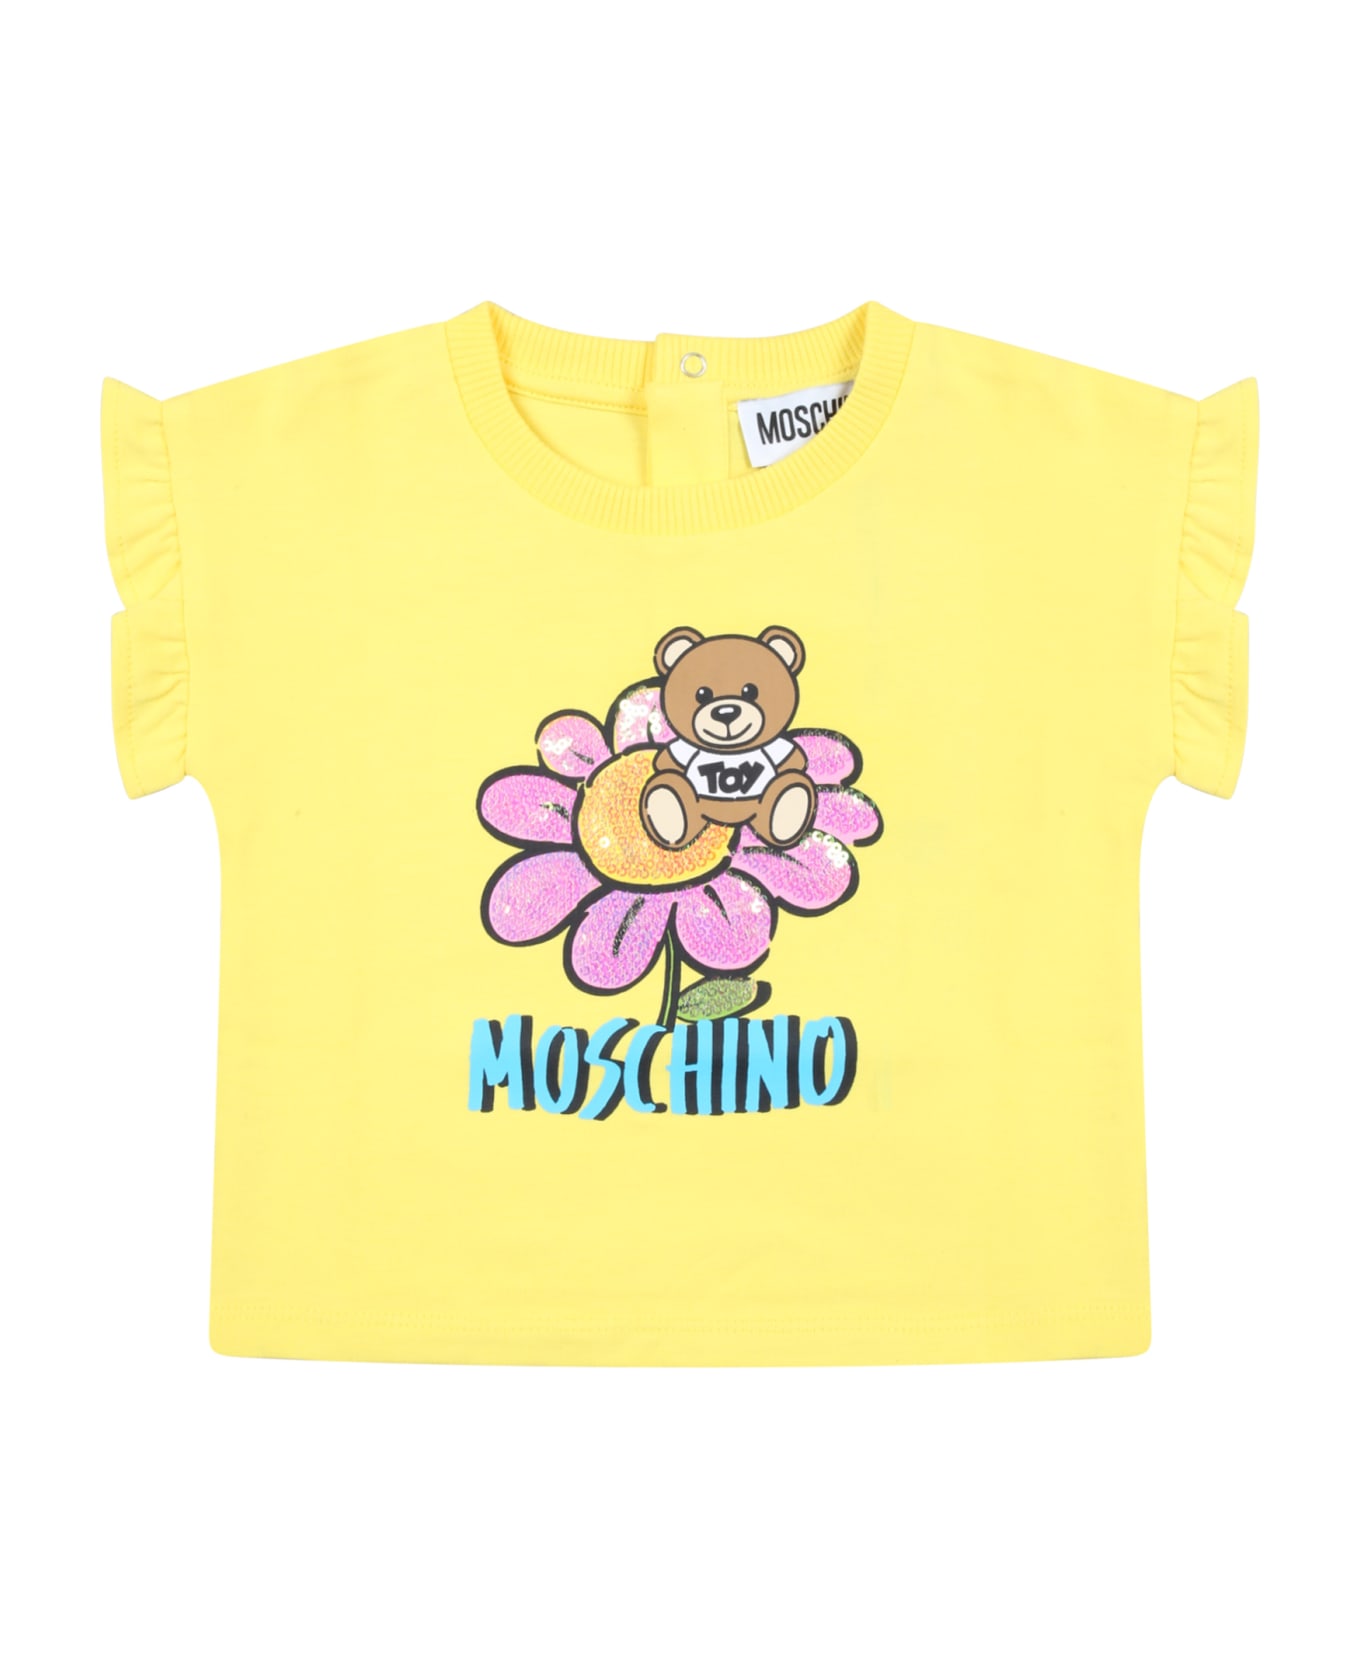 Moschino Yellow T-shirt For Baby Girl With Teddy Bear And Flowers - Yellow